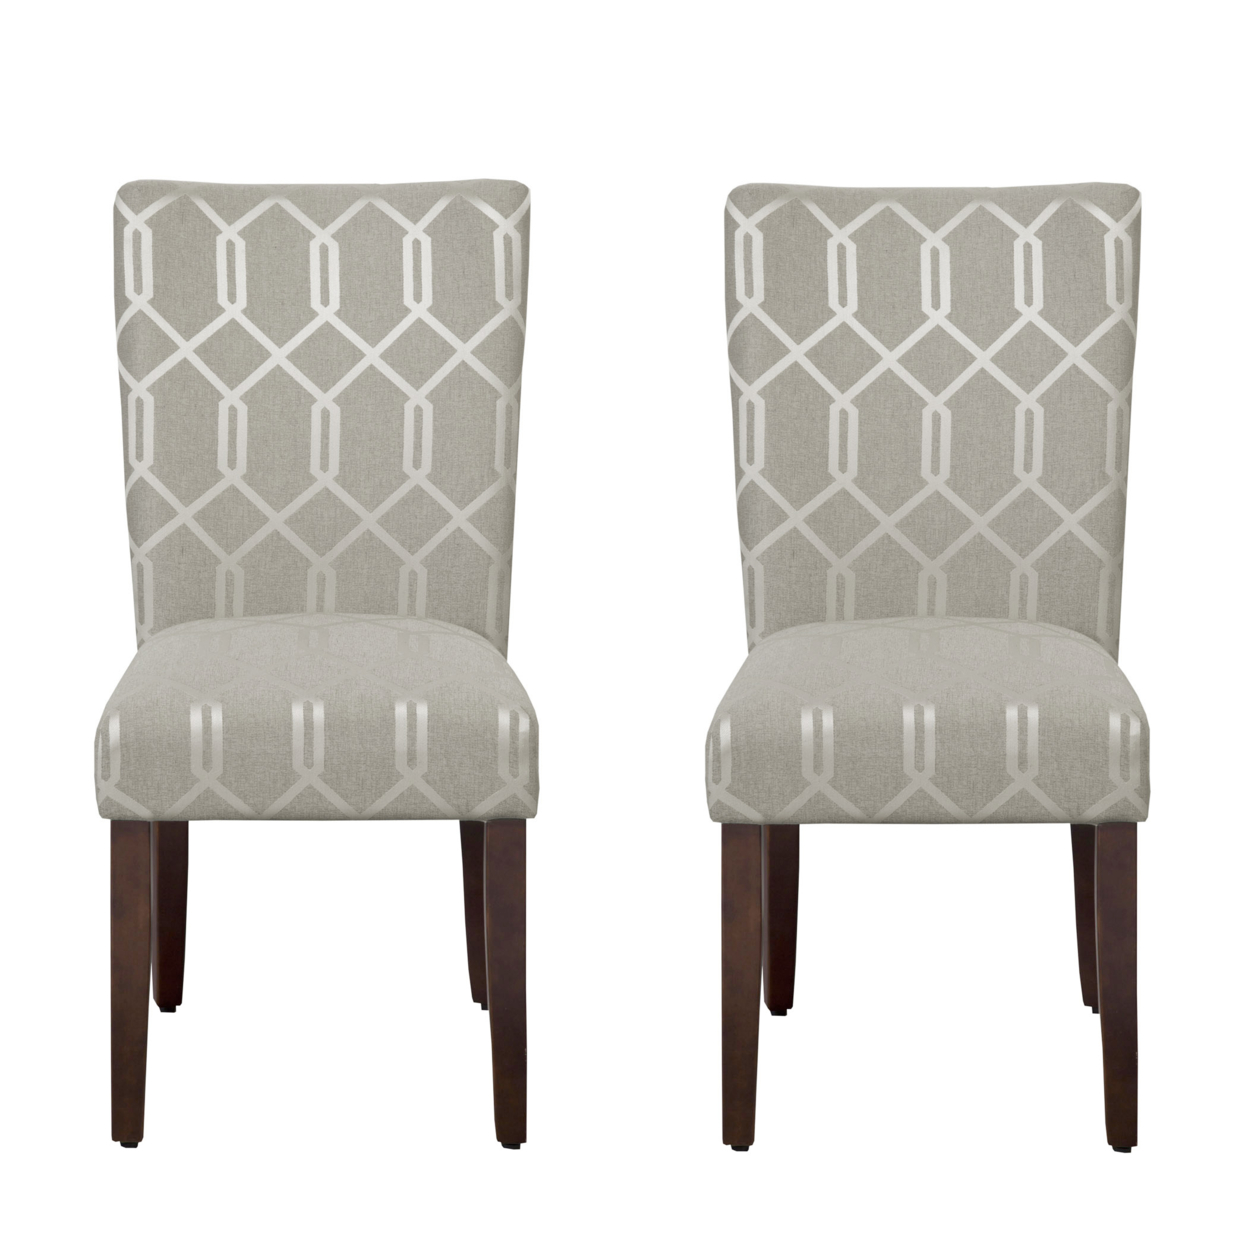 Wooden Parson Dining Chairs With Lattice Patterned Fabric Upholstery, Gray, Set Of Two- Saltoro Sherpi